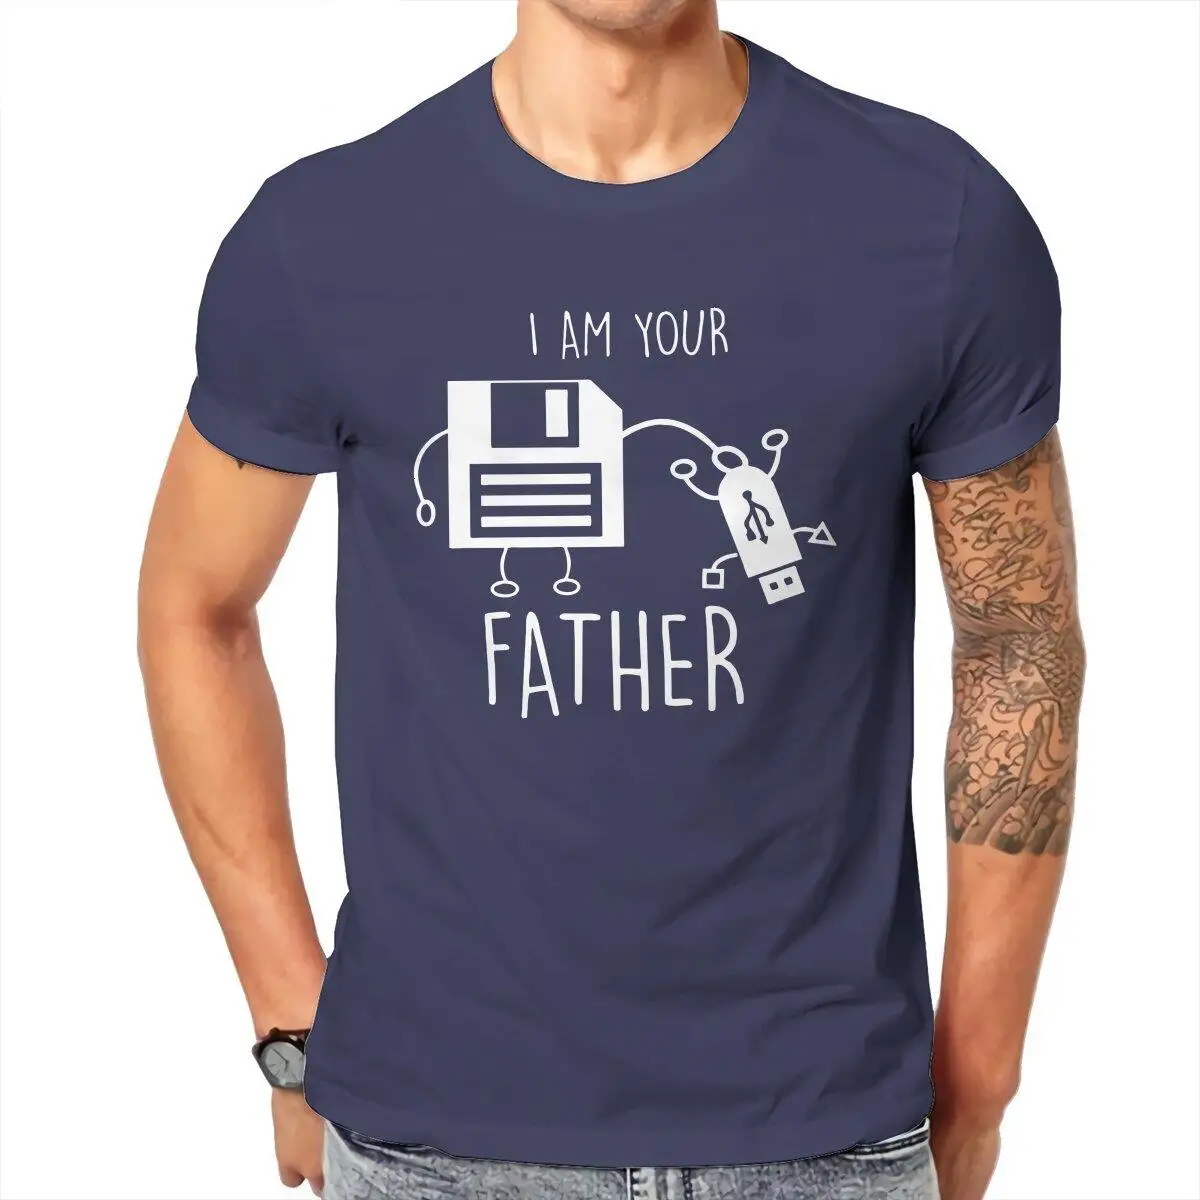 I Am Your Father T-Shirt Men Cute Funny USB Floppy Disk Casual 100% Cotton Tee Shirt Crewneck T Shirts New Arrival Clothing